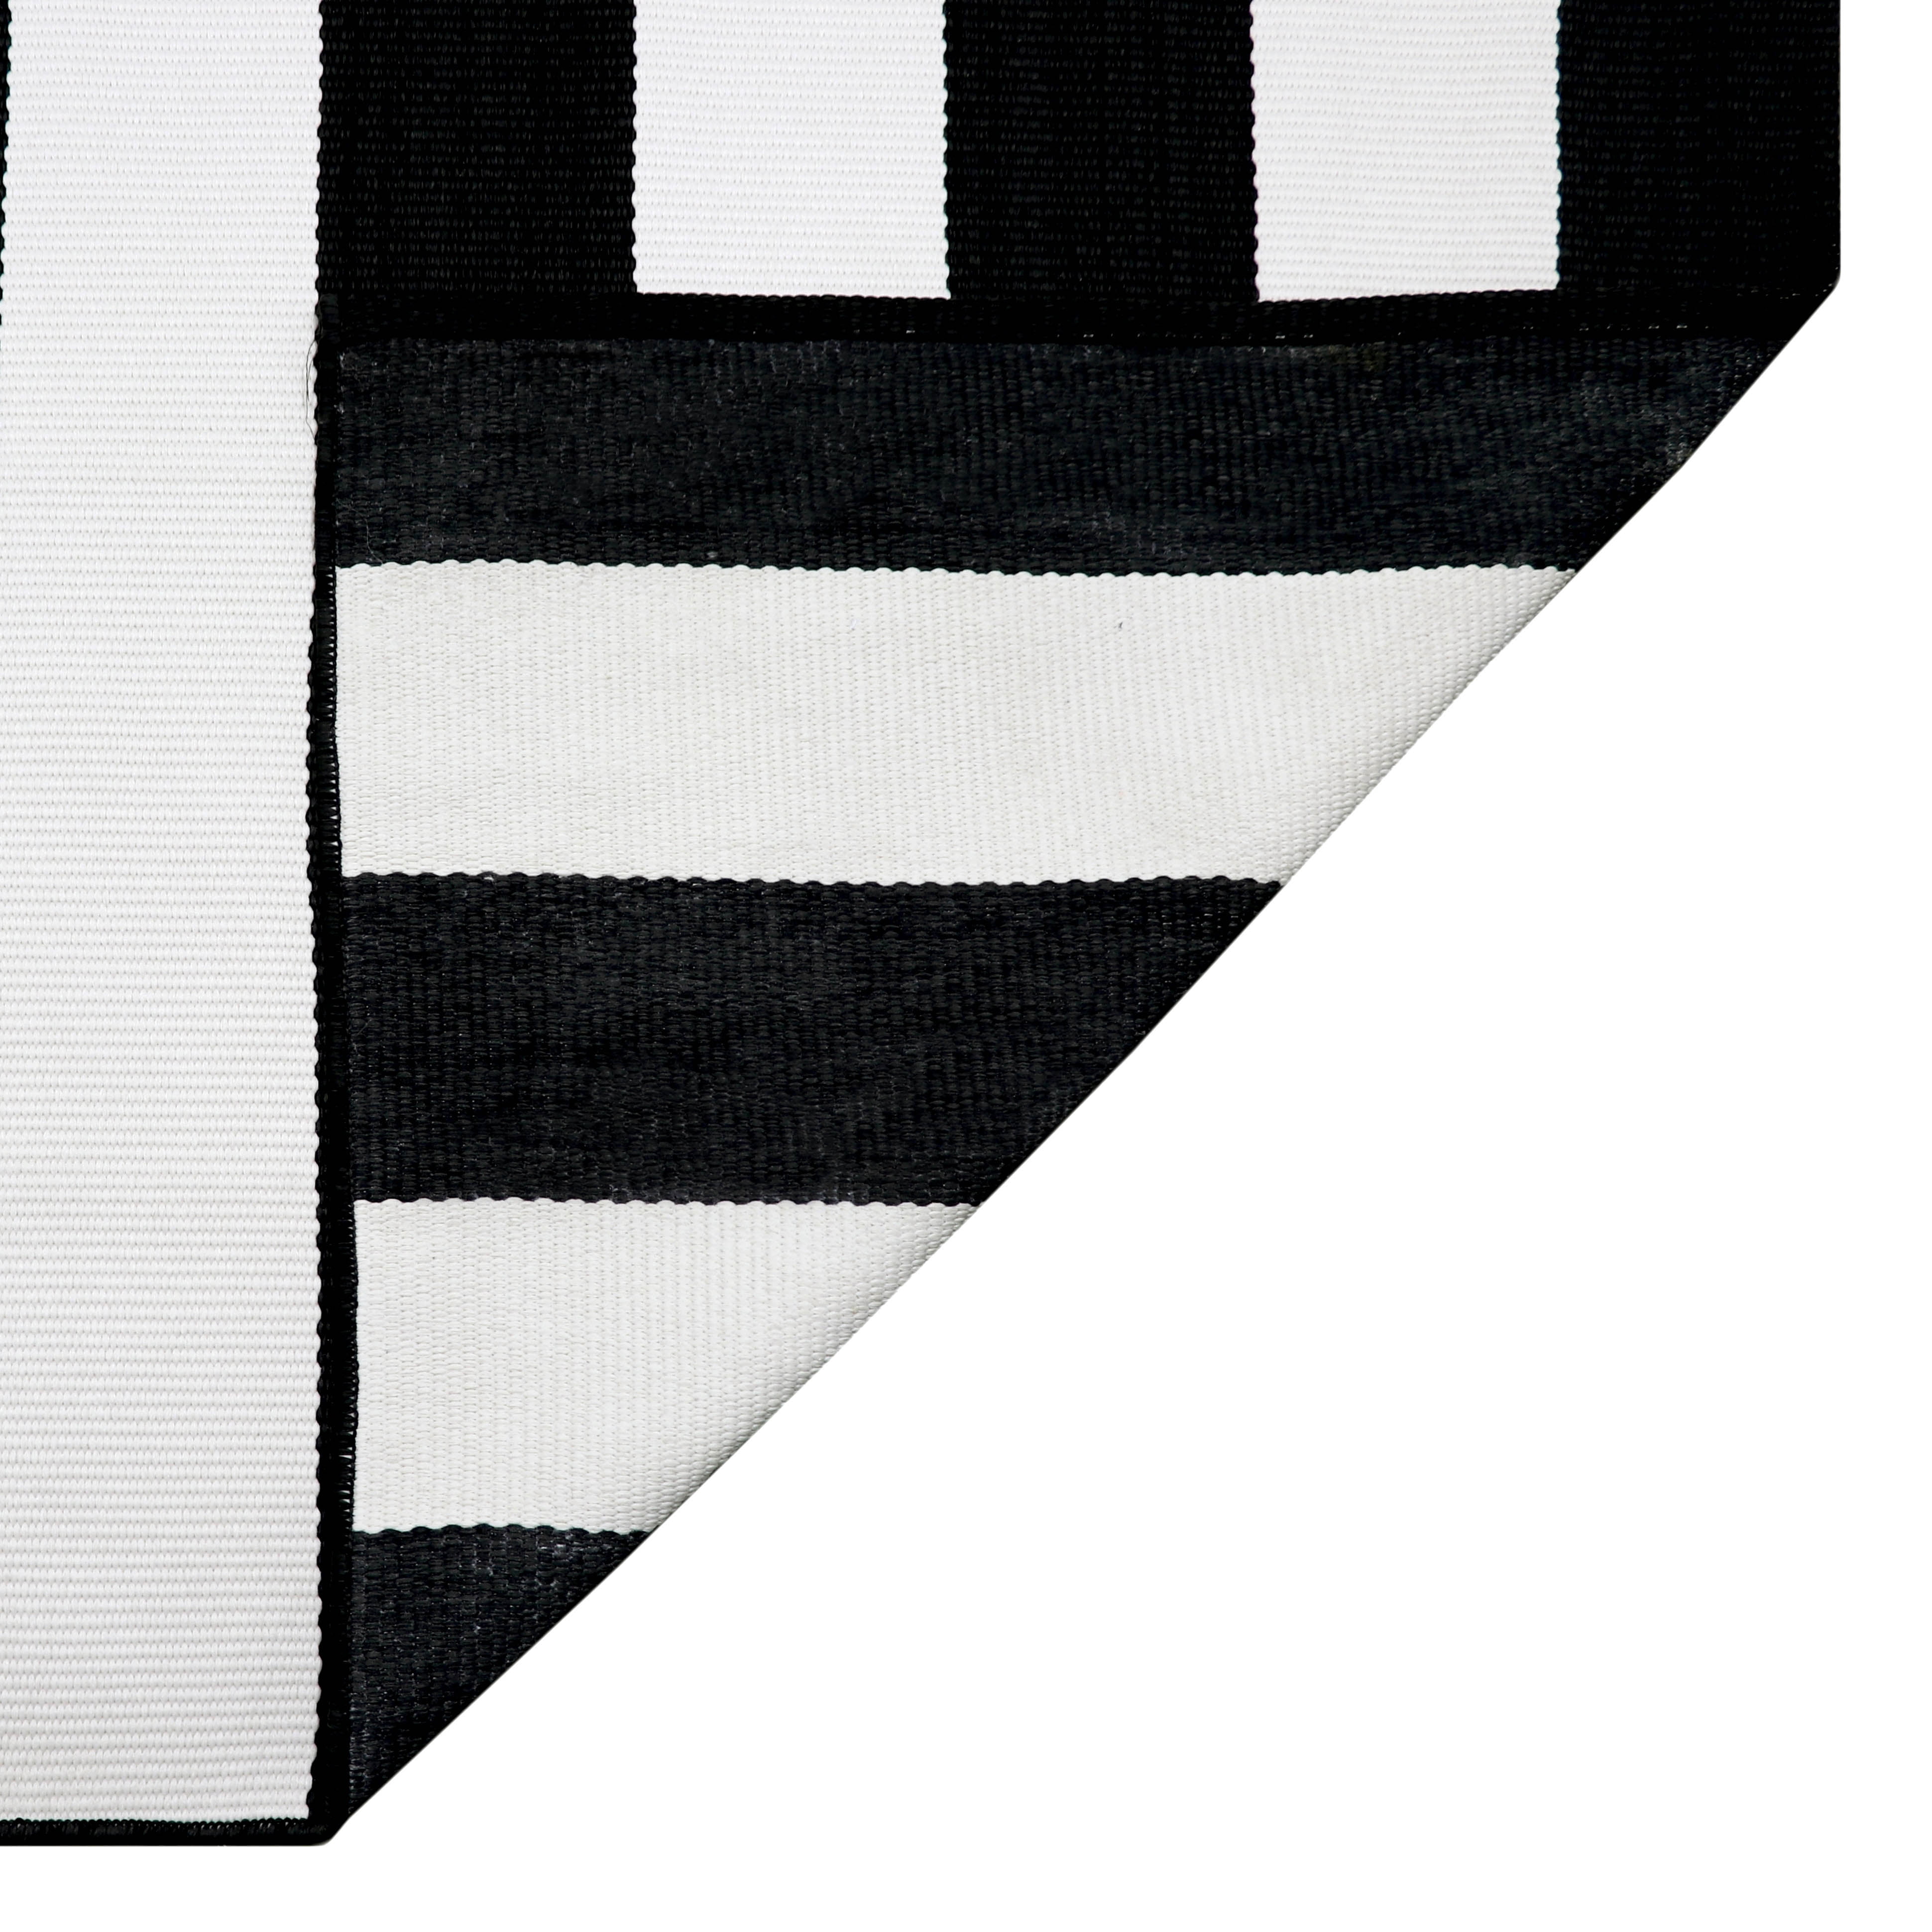  KOZYFLY Striped Outdoor Rug 3x5 Ft Black and White